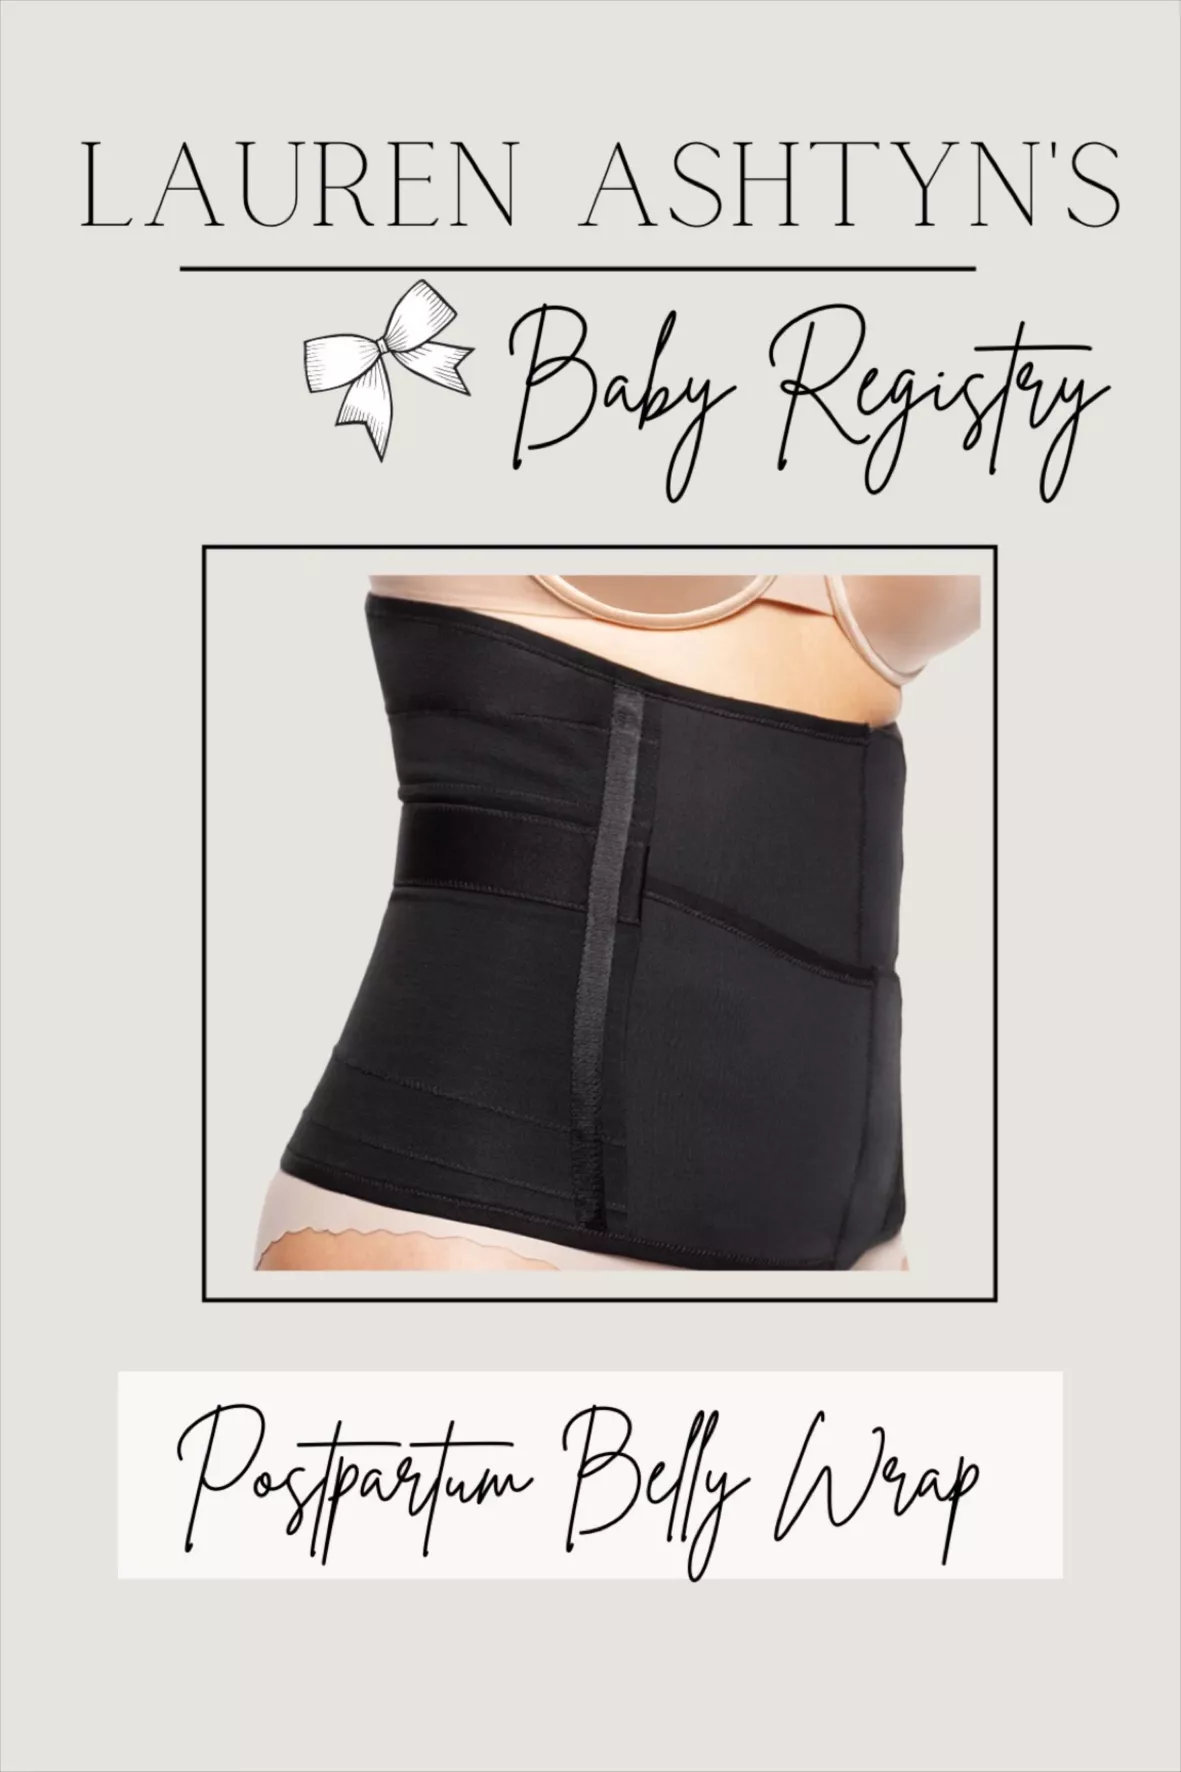 Belly Bandit - Postpartum Luxe … curated on LTK